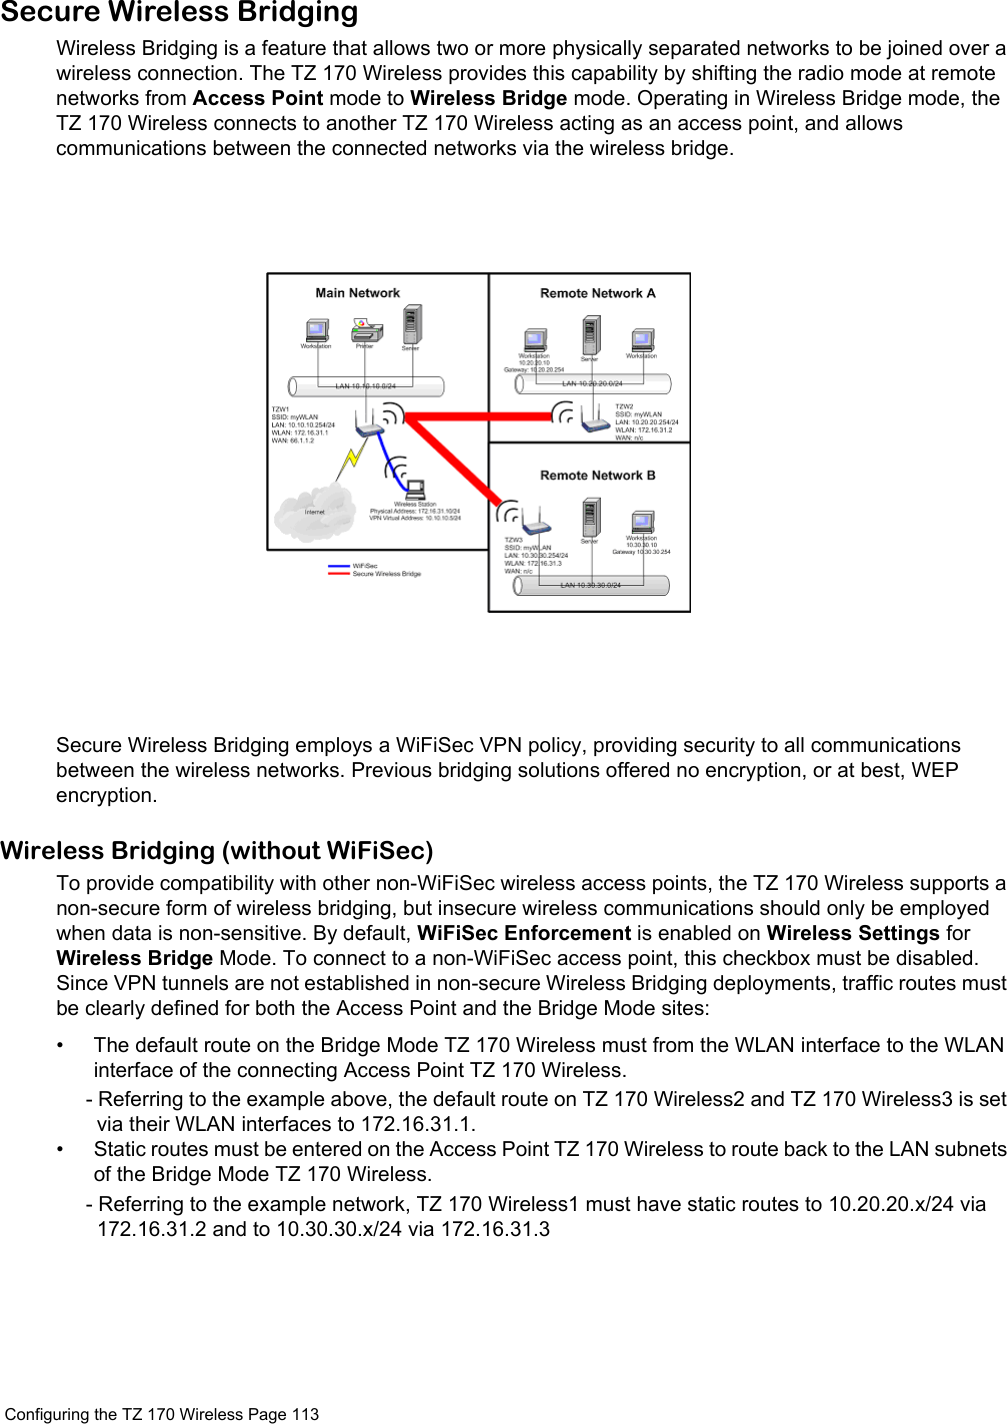  Configuring the TZ 170 Wireless Page 113 Secure Wireless BridgingWireless Bridging is a feature that allows two or more physically separated networks to be joined over a wireless connection. The TZ 170 Wireless provides this capability by shifting the radio mode at remote networks from Access Point mode to Wireless Bridge mode. Operating in Wireless Bridge mode, the TZ 170 Wireless connects to another TZ 170 Wireless acting as an access point, and allows communications between the connected networks via the wireless bridge.Secure Wireless Bridging employs a WiFiSec VPN policy, providing security to all communications between the wireless networks. Previous bridging solutions offered no encryption, or at best, WEP encryption.Wireless Bridging (without WiFiSec)To provide compatibility with other non-WiFiSec wireless access points, the TZ 170 Wireless supports a non-secure form of wireless bridging, but insecure wireless communications should only be employed when data is non-sensitive. By default, WiFiSec Enforcement is enabled on Wireless Settings for Wireless Bridge Mode. To connect to a non-WiFiSec access point, this checkbox must be disabled. Since VPN tunnels are not established in non-secure Wireless Bridging deployments, traffic routes must be clearly defined for both the Access Point and the Bridge Mode sites:• The default route on the Bridge Mode TZ 170 Wireless must from the WLAN interface to the WLAN interface of the connecting Access Point TZ 170 Wireless.- Referring to the example above, the default route on TZ 170 Wireless2 and TZ 170 Wireless3 is set via their WLAN interfaces to 172.16.31.1.• Static routes must be entered on the Access Point TZ 170 Wireless to route back to the LAN subnets of the Bridge Mode TZ 170 Wireless.- Referring to the example network, TZ 170 Wireless1 must have static routes to 10.20.20.x/24 via 172.16.31.2 and to 10.30.30.x/24 via 172.16.31.3